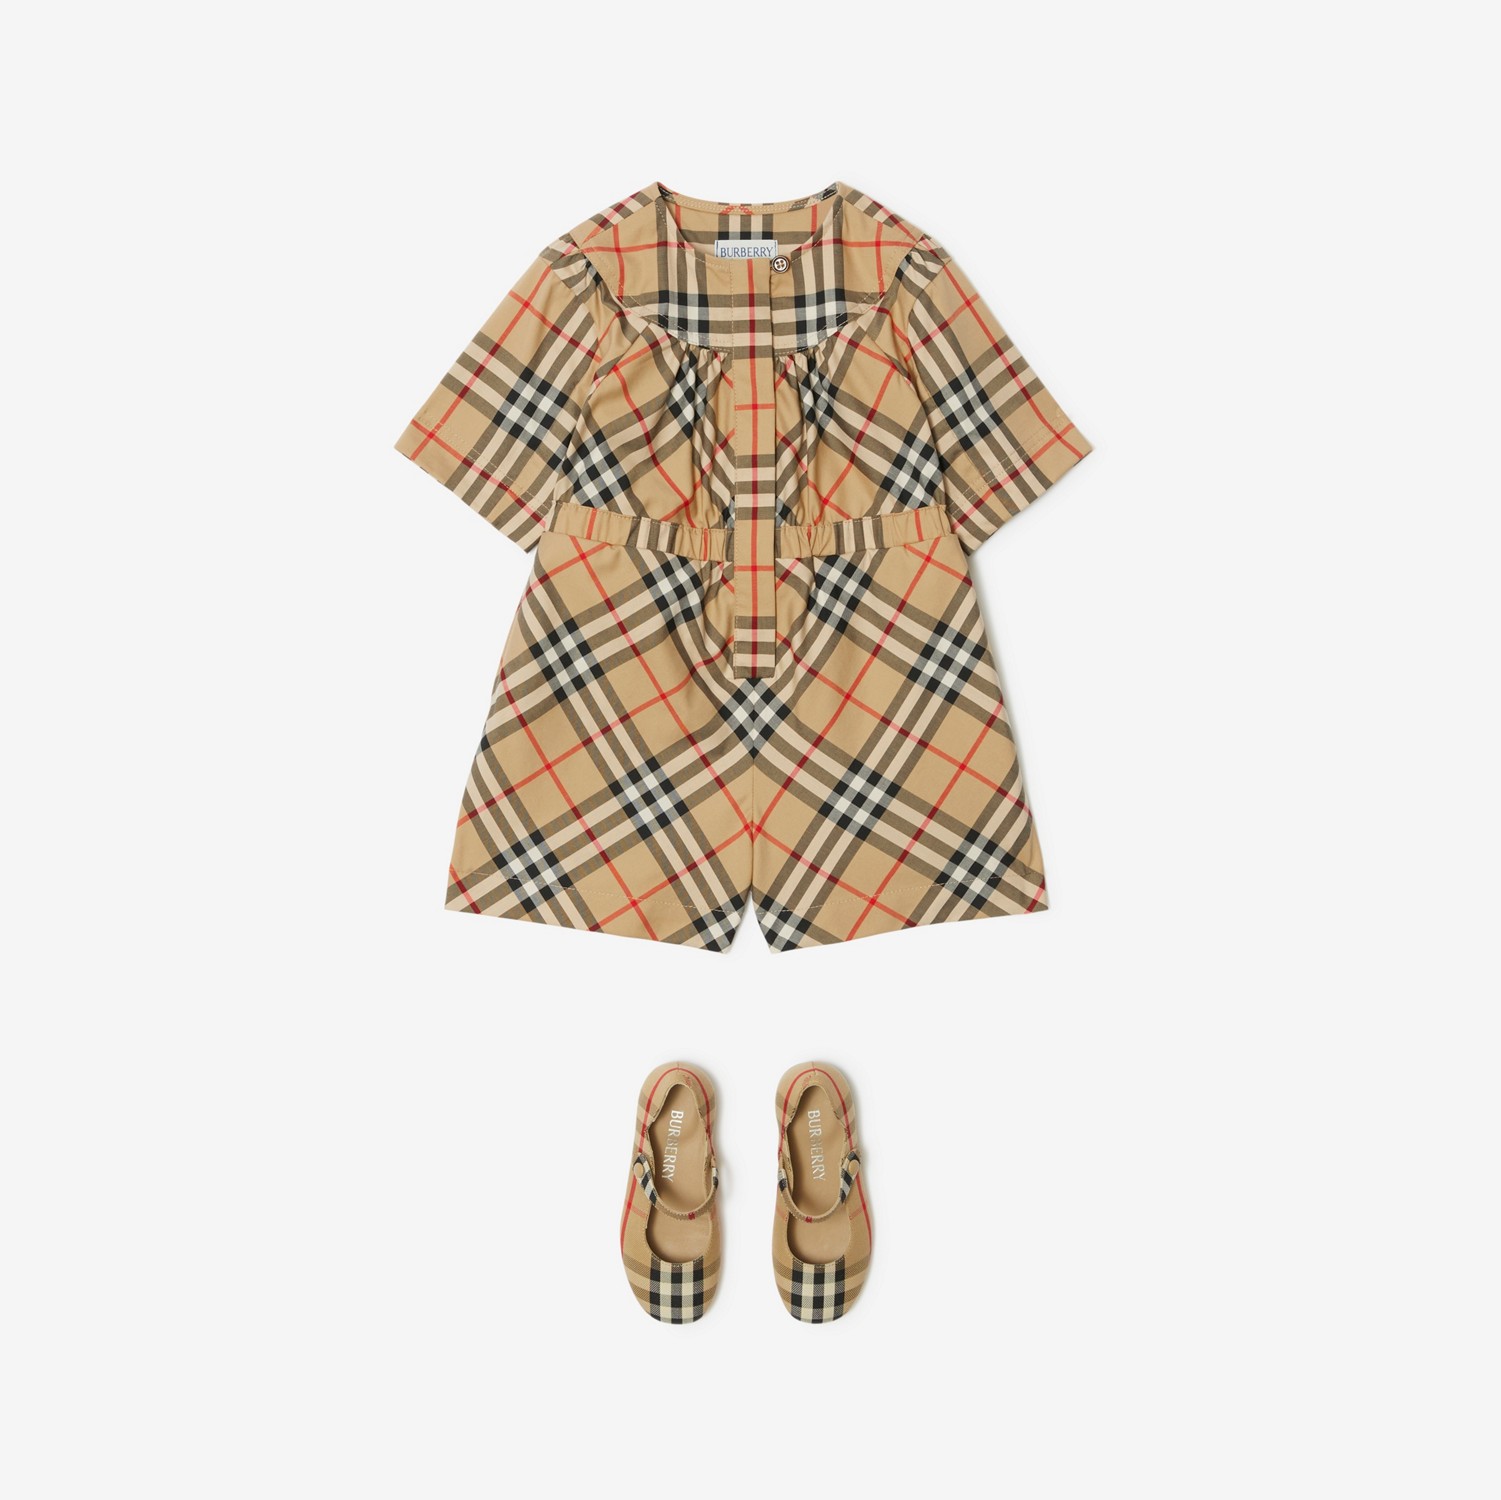 Stretchbaumwoll-Playsuit in Check